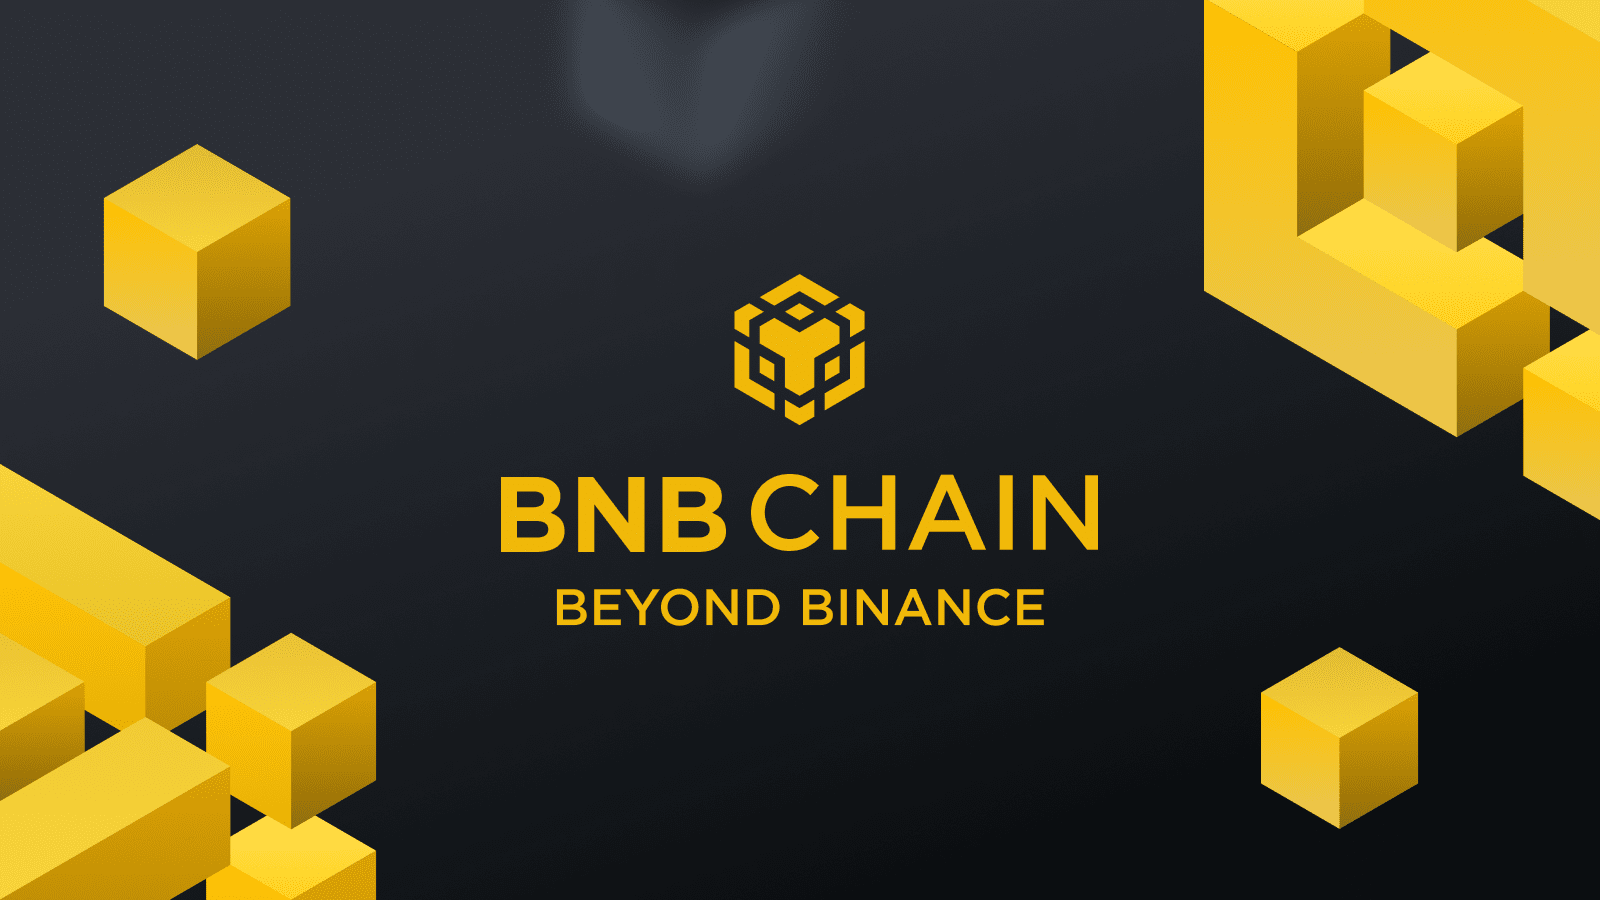 z16 - Financial Futurism - Binance to Distribute $5M Worth of BNB to Earthquake-Affected Turkish Users - ETH